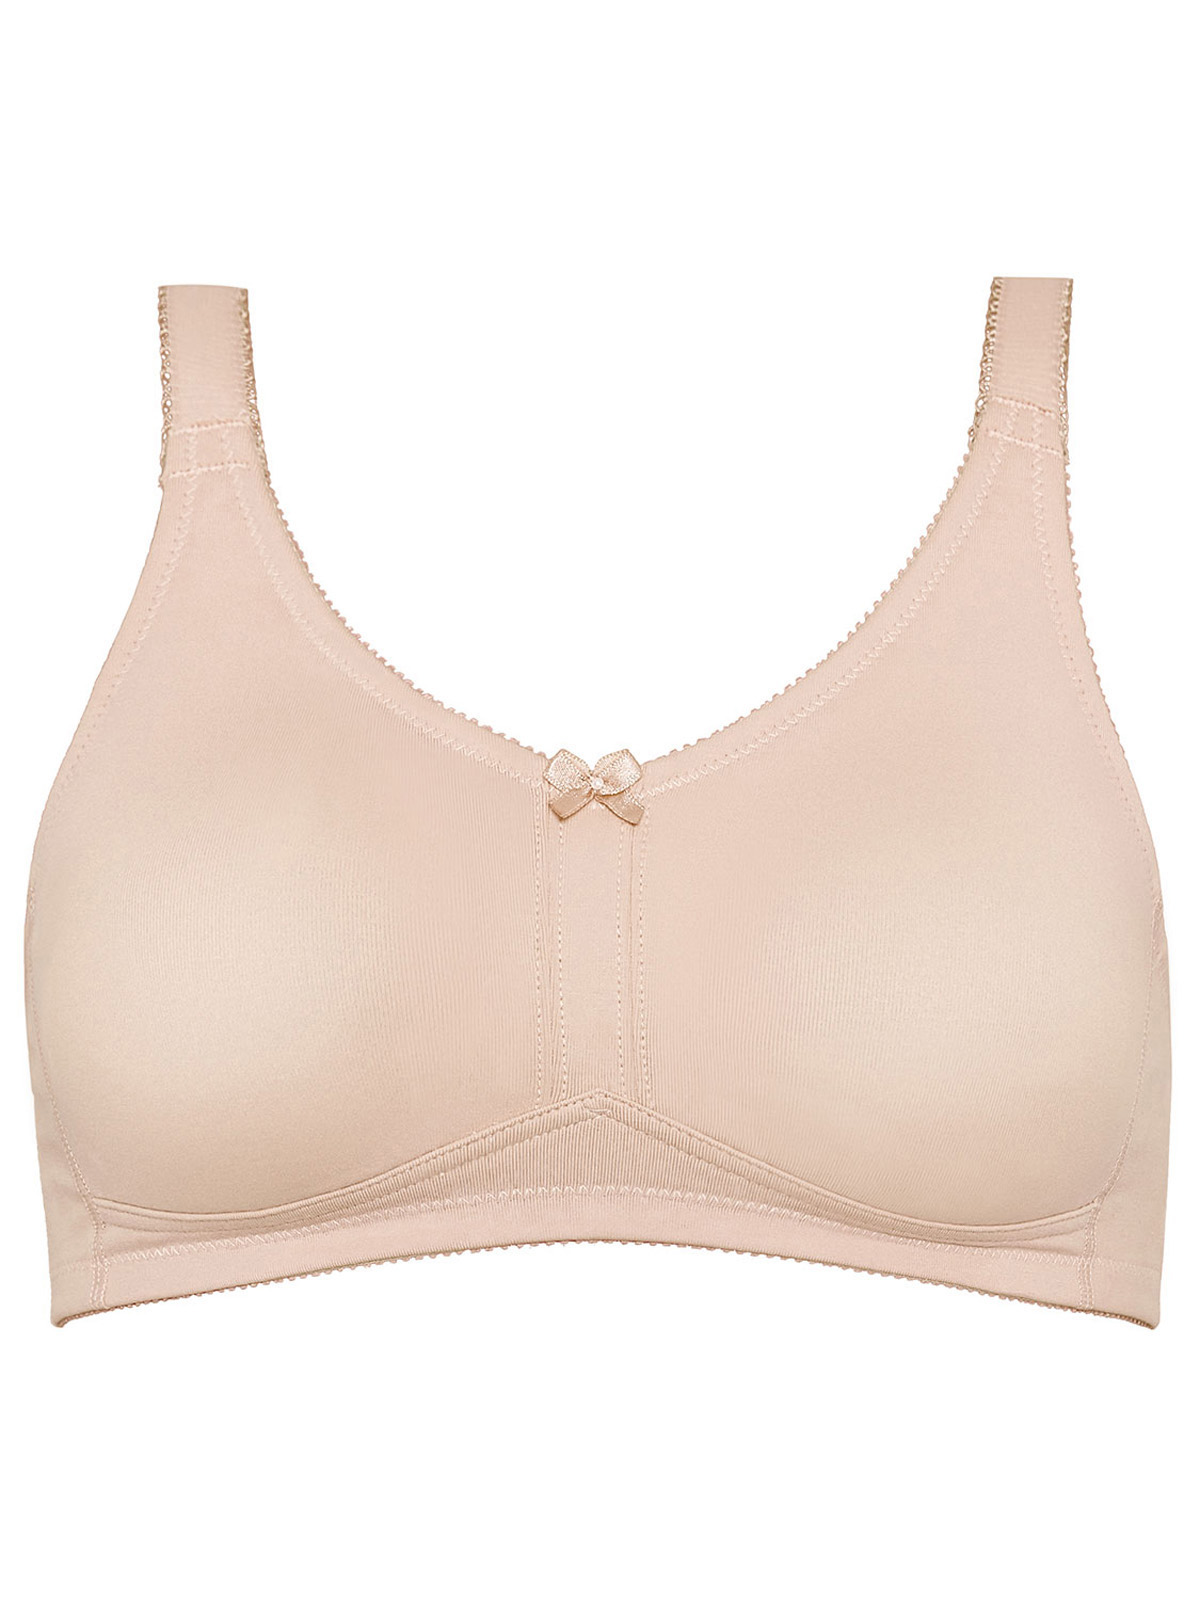 Naturana Naturana Assorted Full Soft Cup Bras Size 34 To 38 B C F